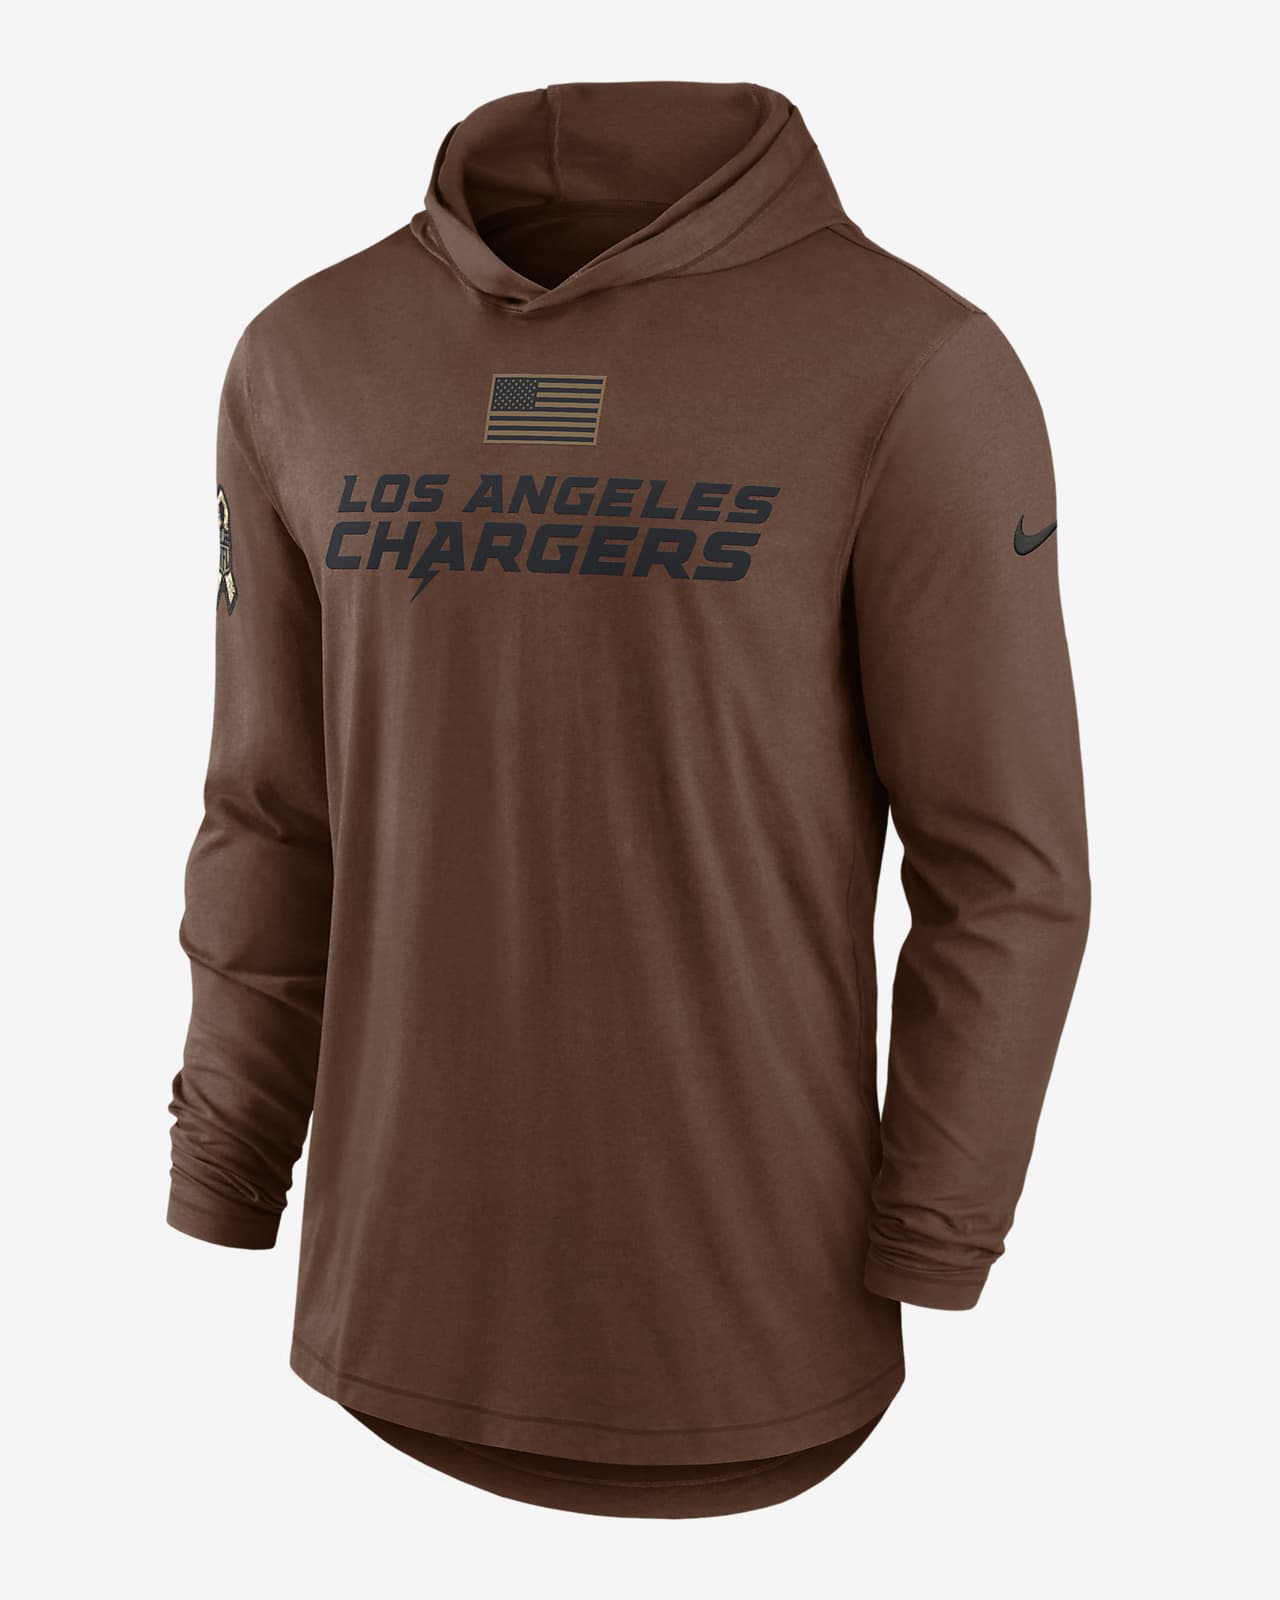 Los Angeles Chargers Salute to Service Men’s Nike Men's Dri-Fit NFL Long-Sleeve Hooded Top in Brown, Size: Small | 010J01CBA2H-U8F